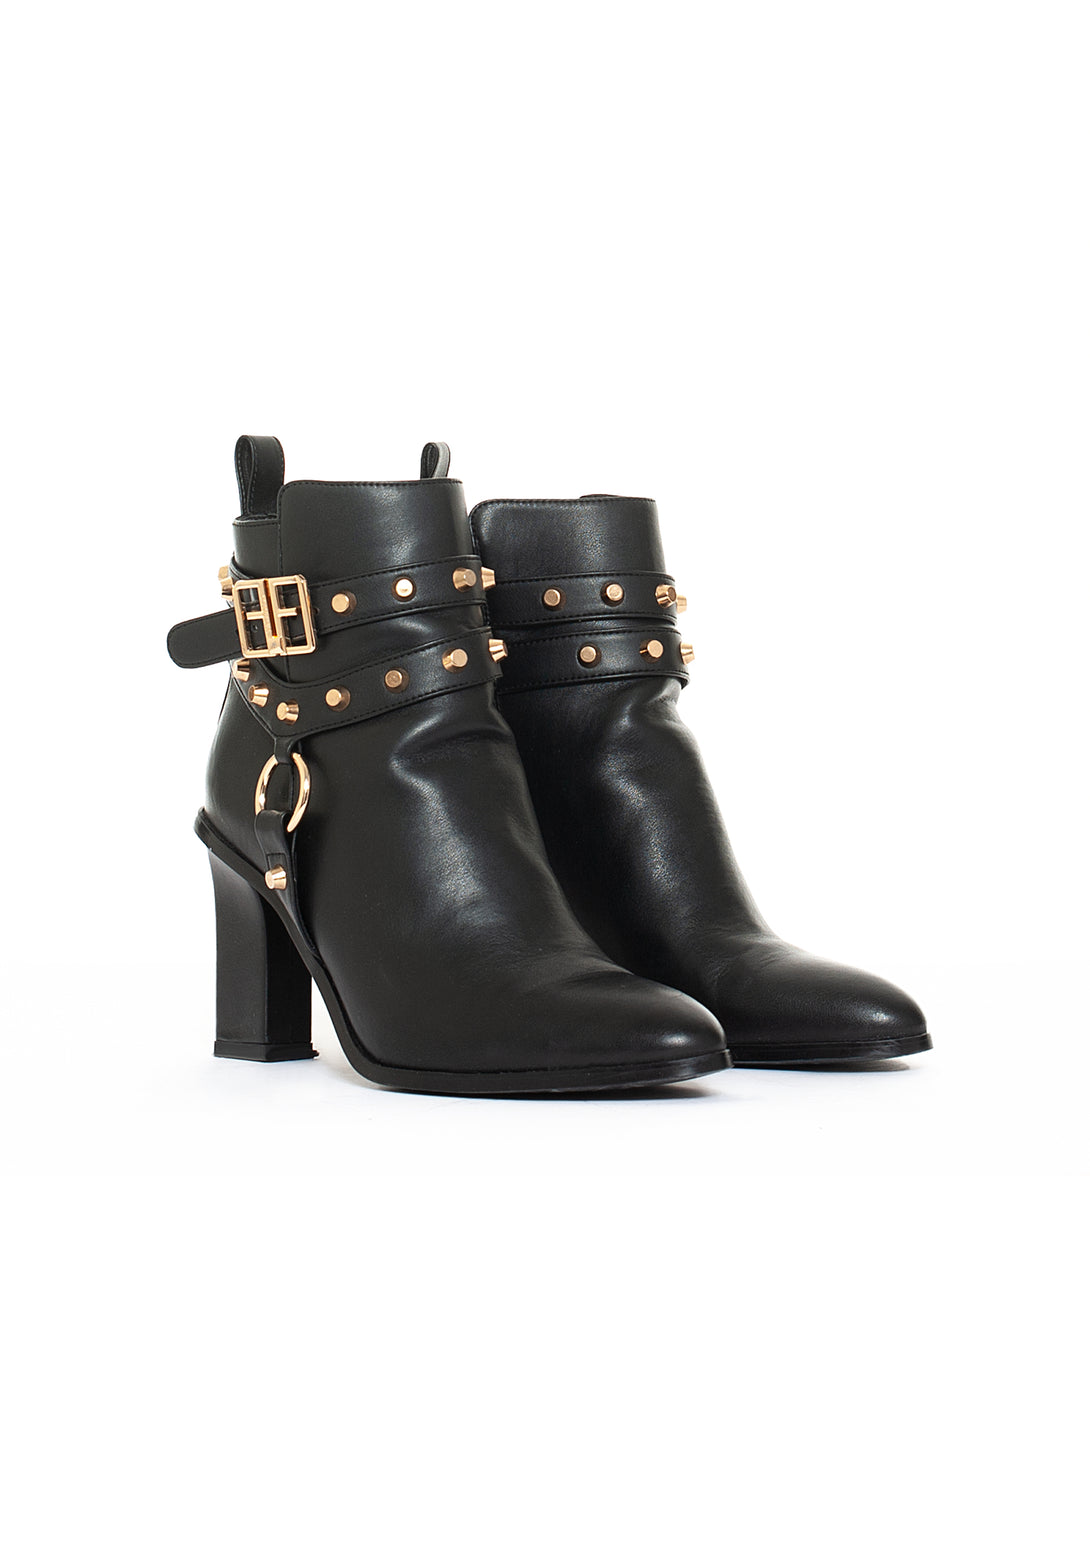 Ankle boots made in leather with metallic studs